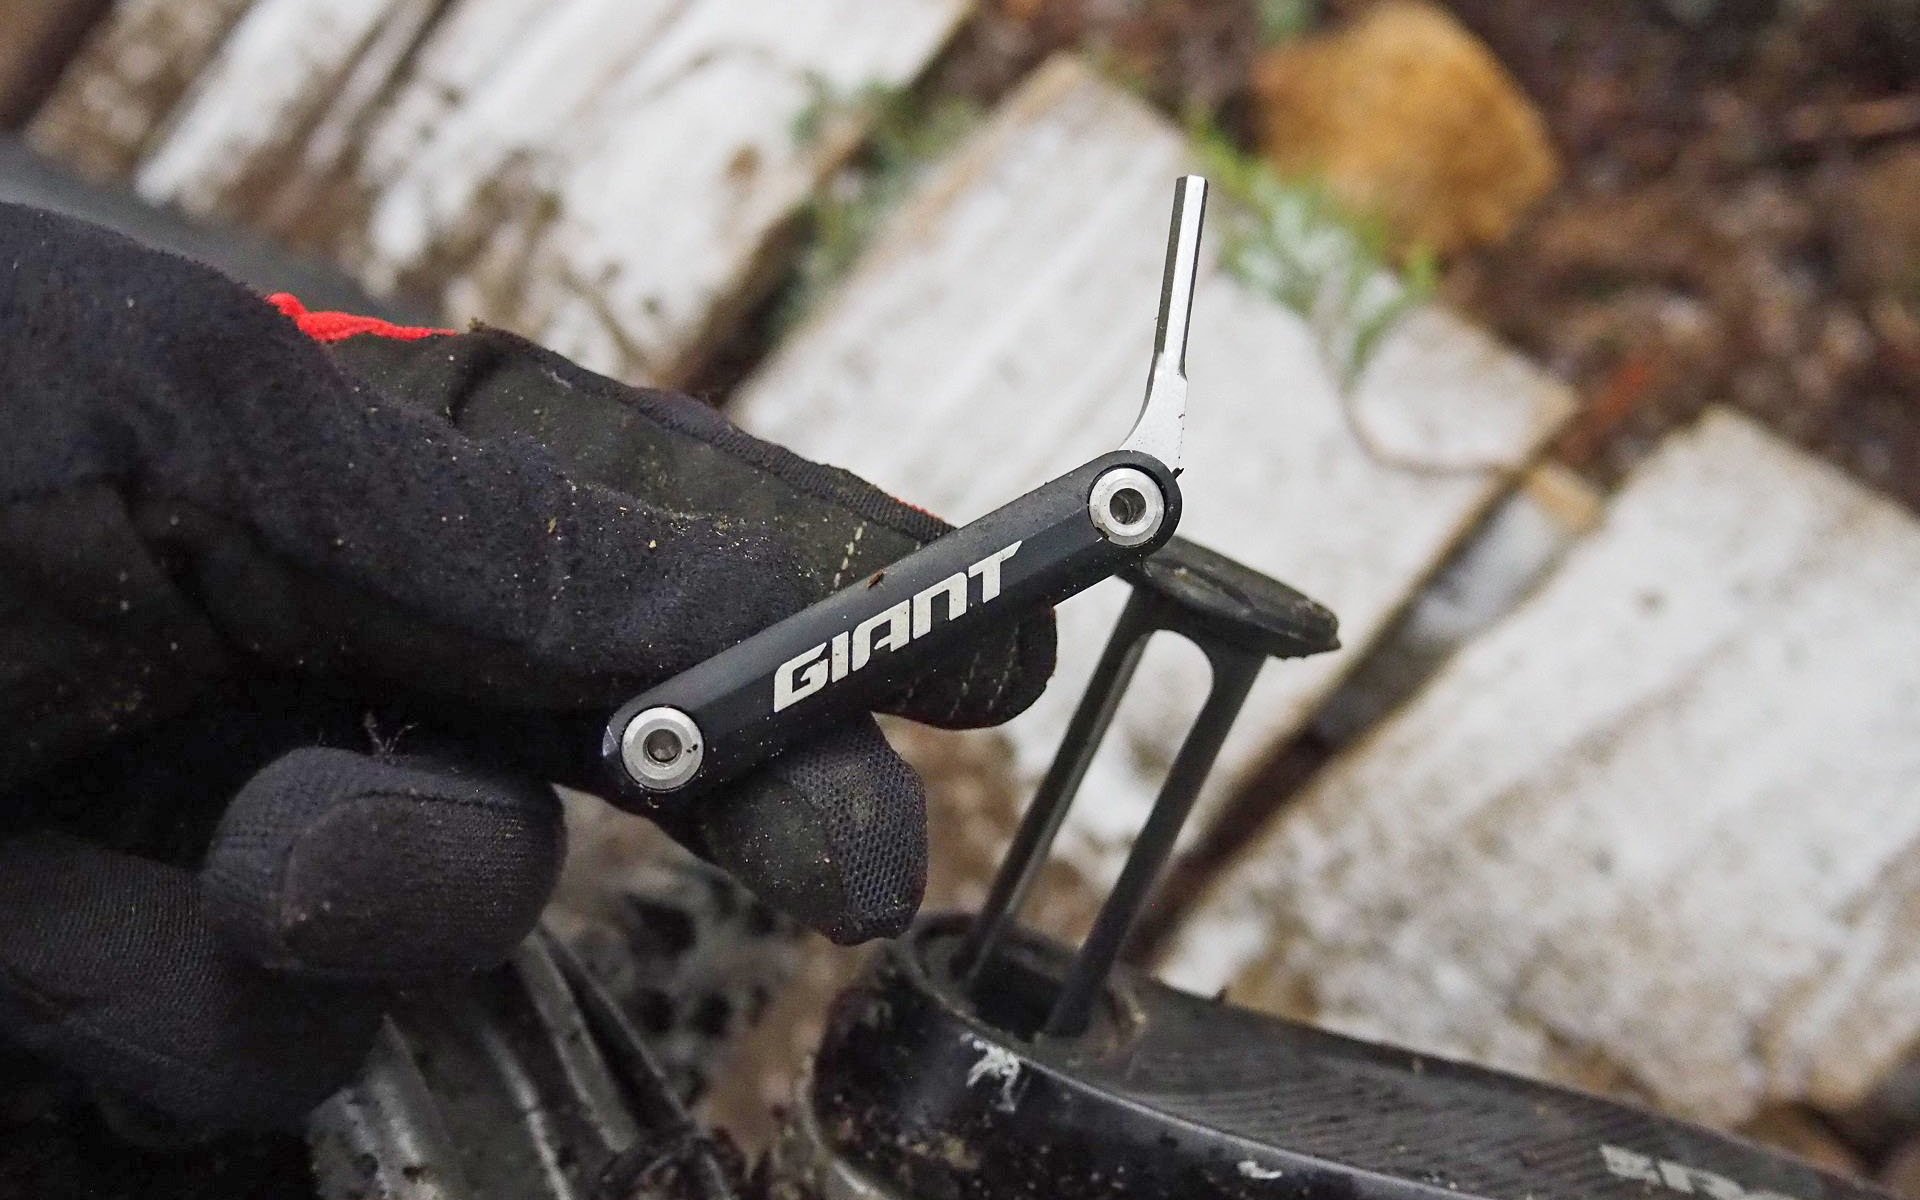 New Tools, Bikes, and Dropper Post Review - Vital Gear Show